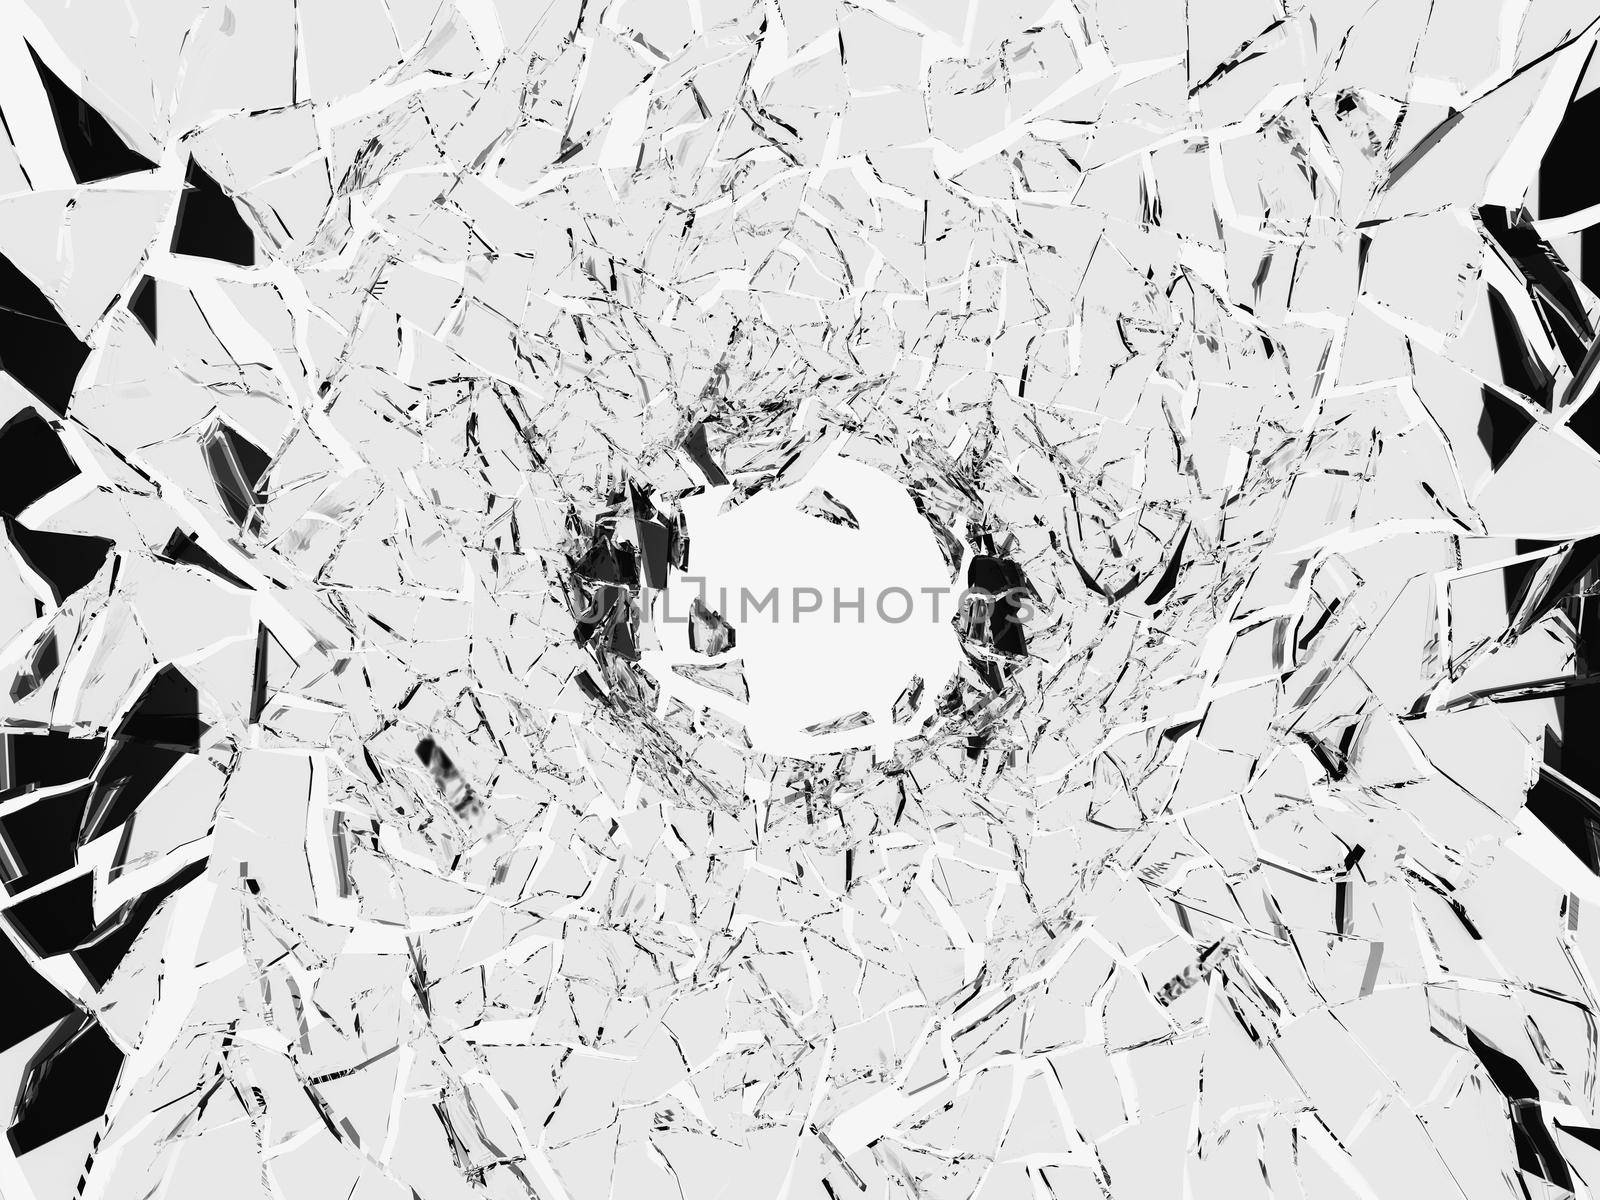 Shattered white glass: sharp Pieces and hole over white background